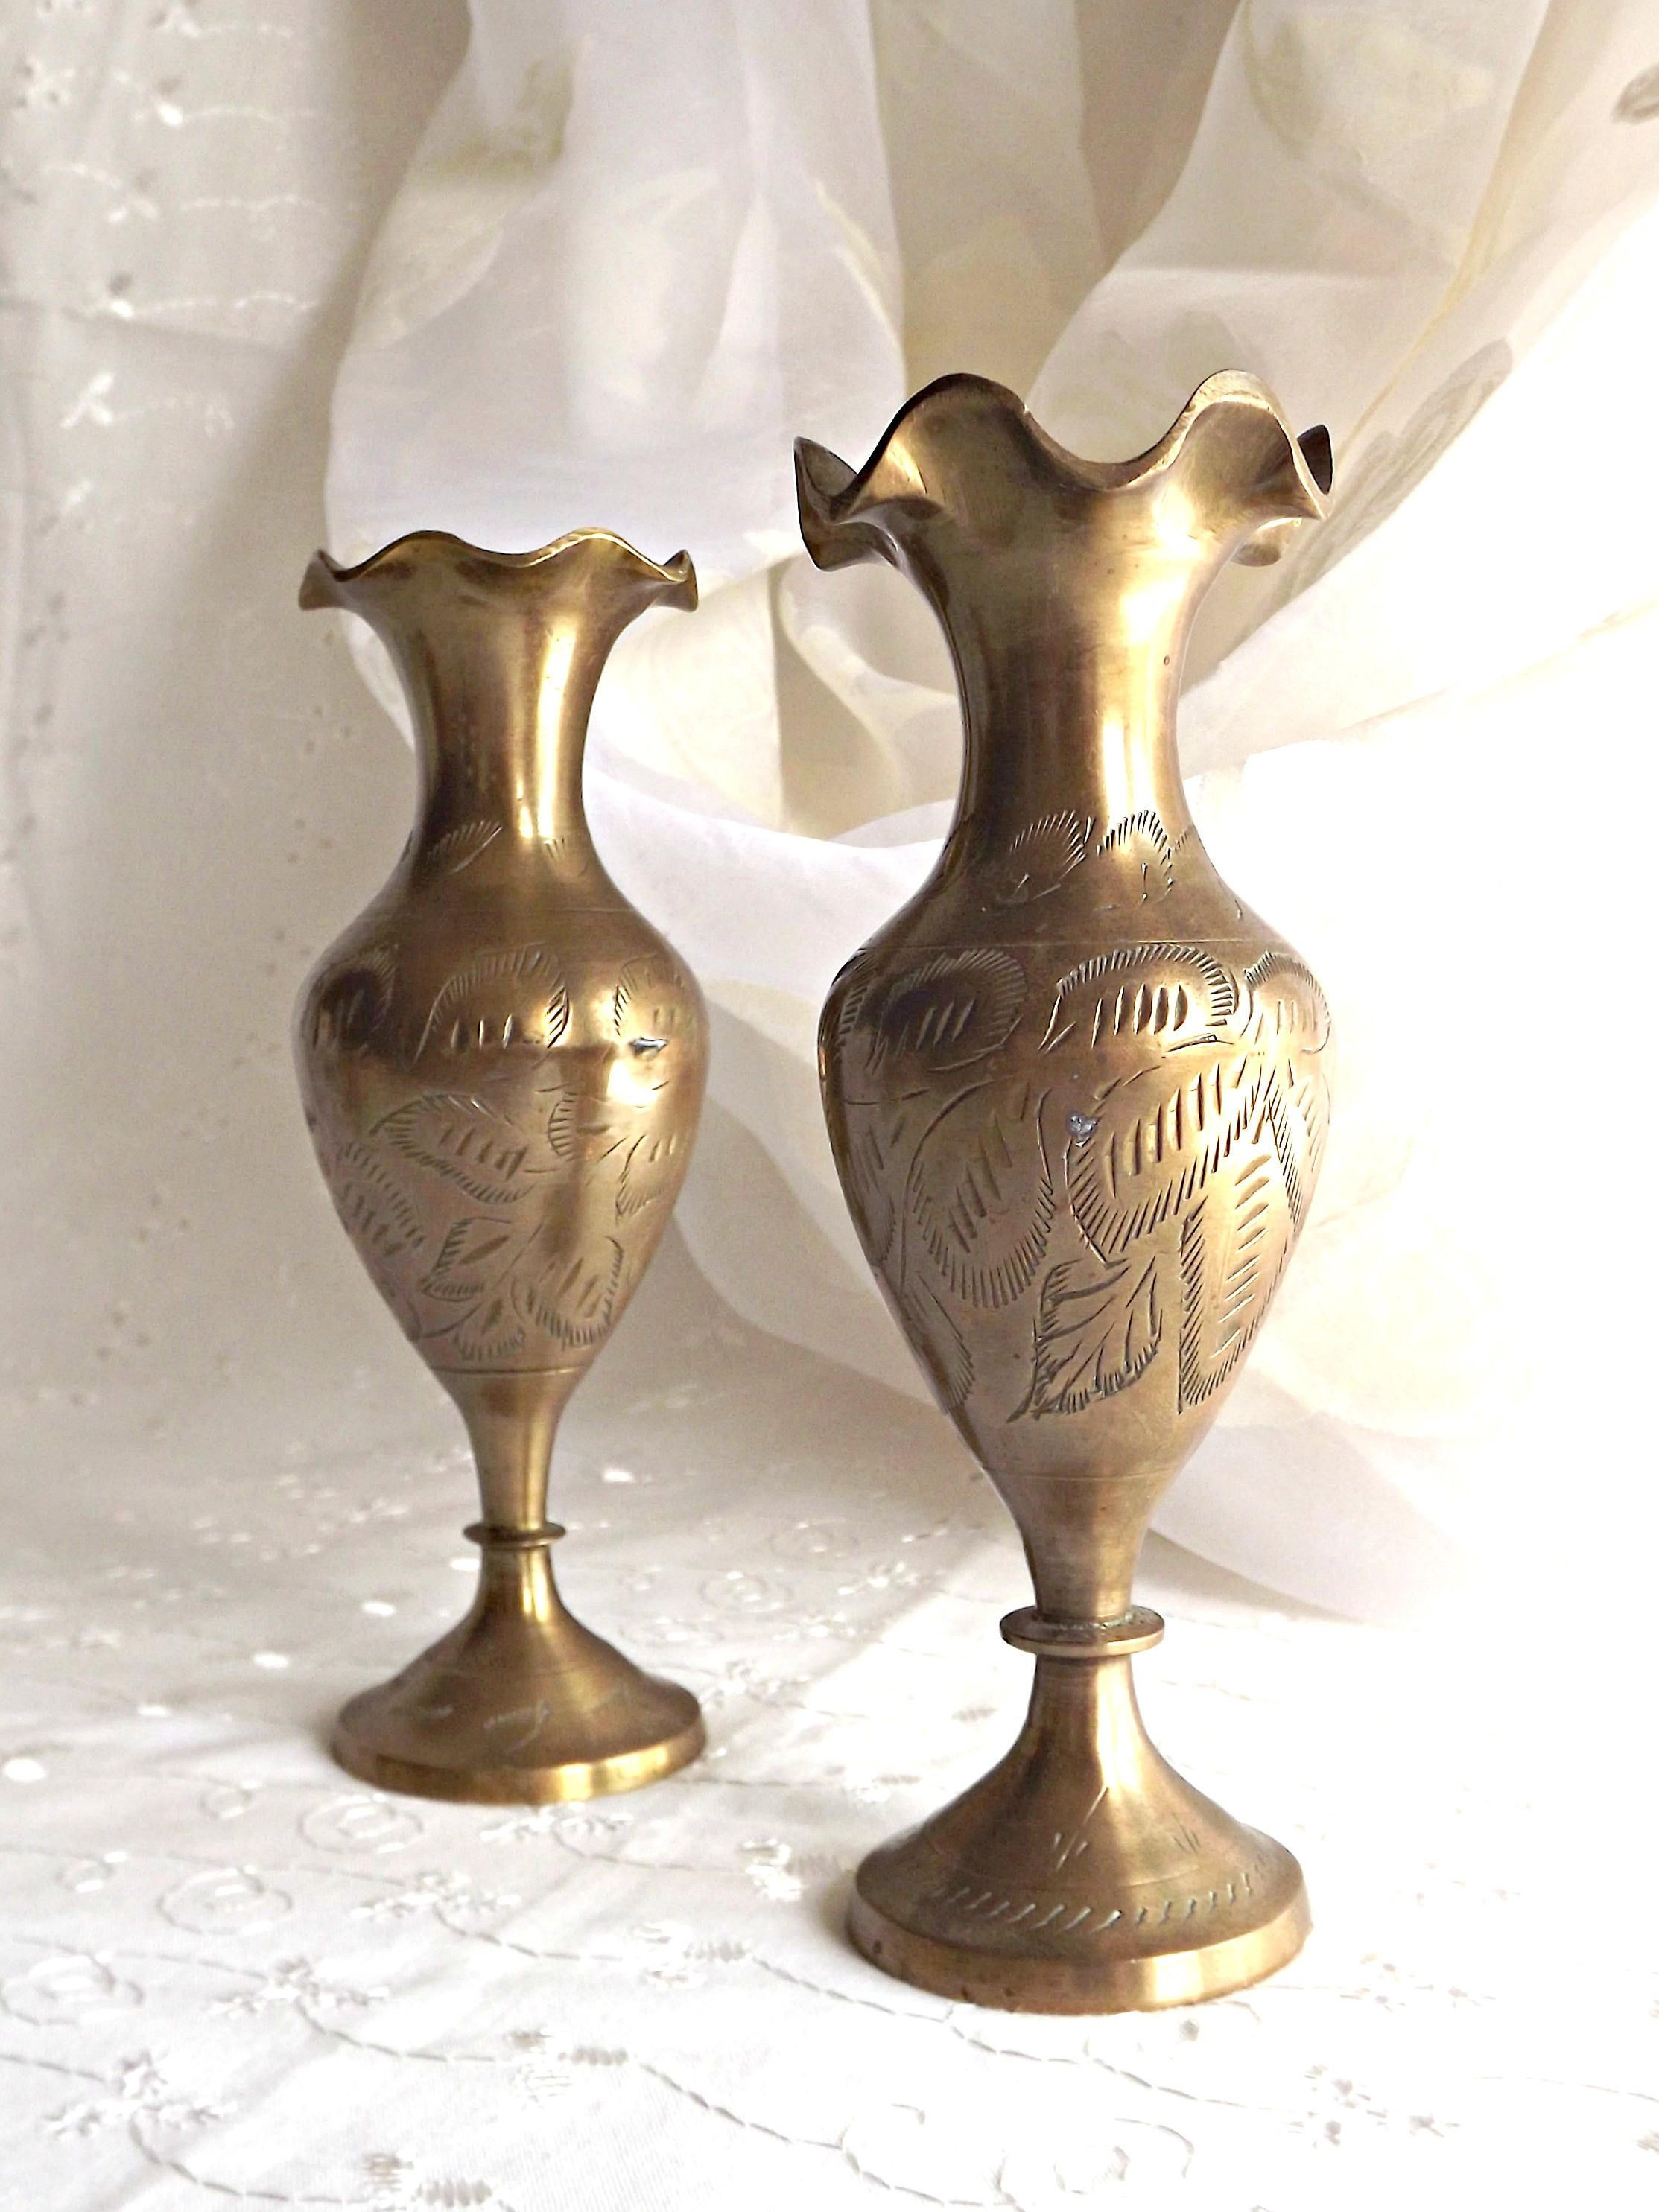 21 Lovely Old Brass Vases 2024 free download old brass vases of brass bud vase stock brass vase etched brass vase retro chic brass pertaining to brass bud vase stock brass vase etched brass vase retro chic brass bohemian